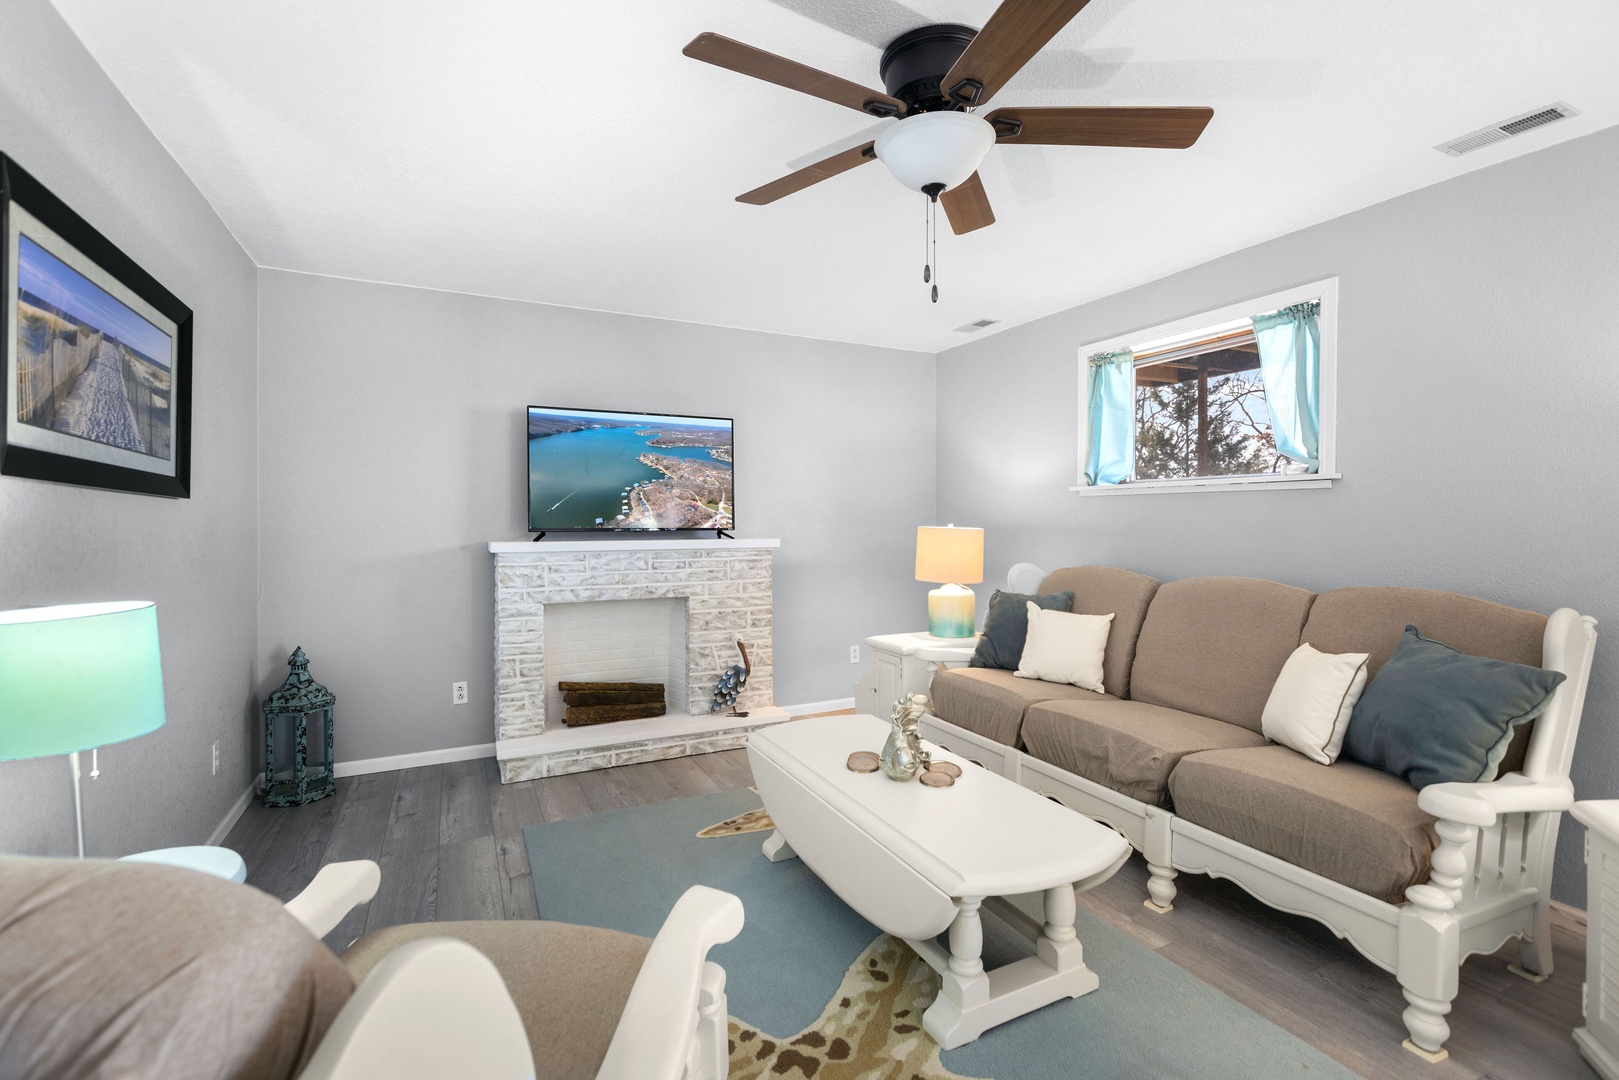 Bright living space with smart TV and ample seating